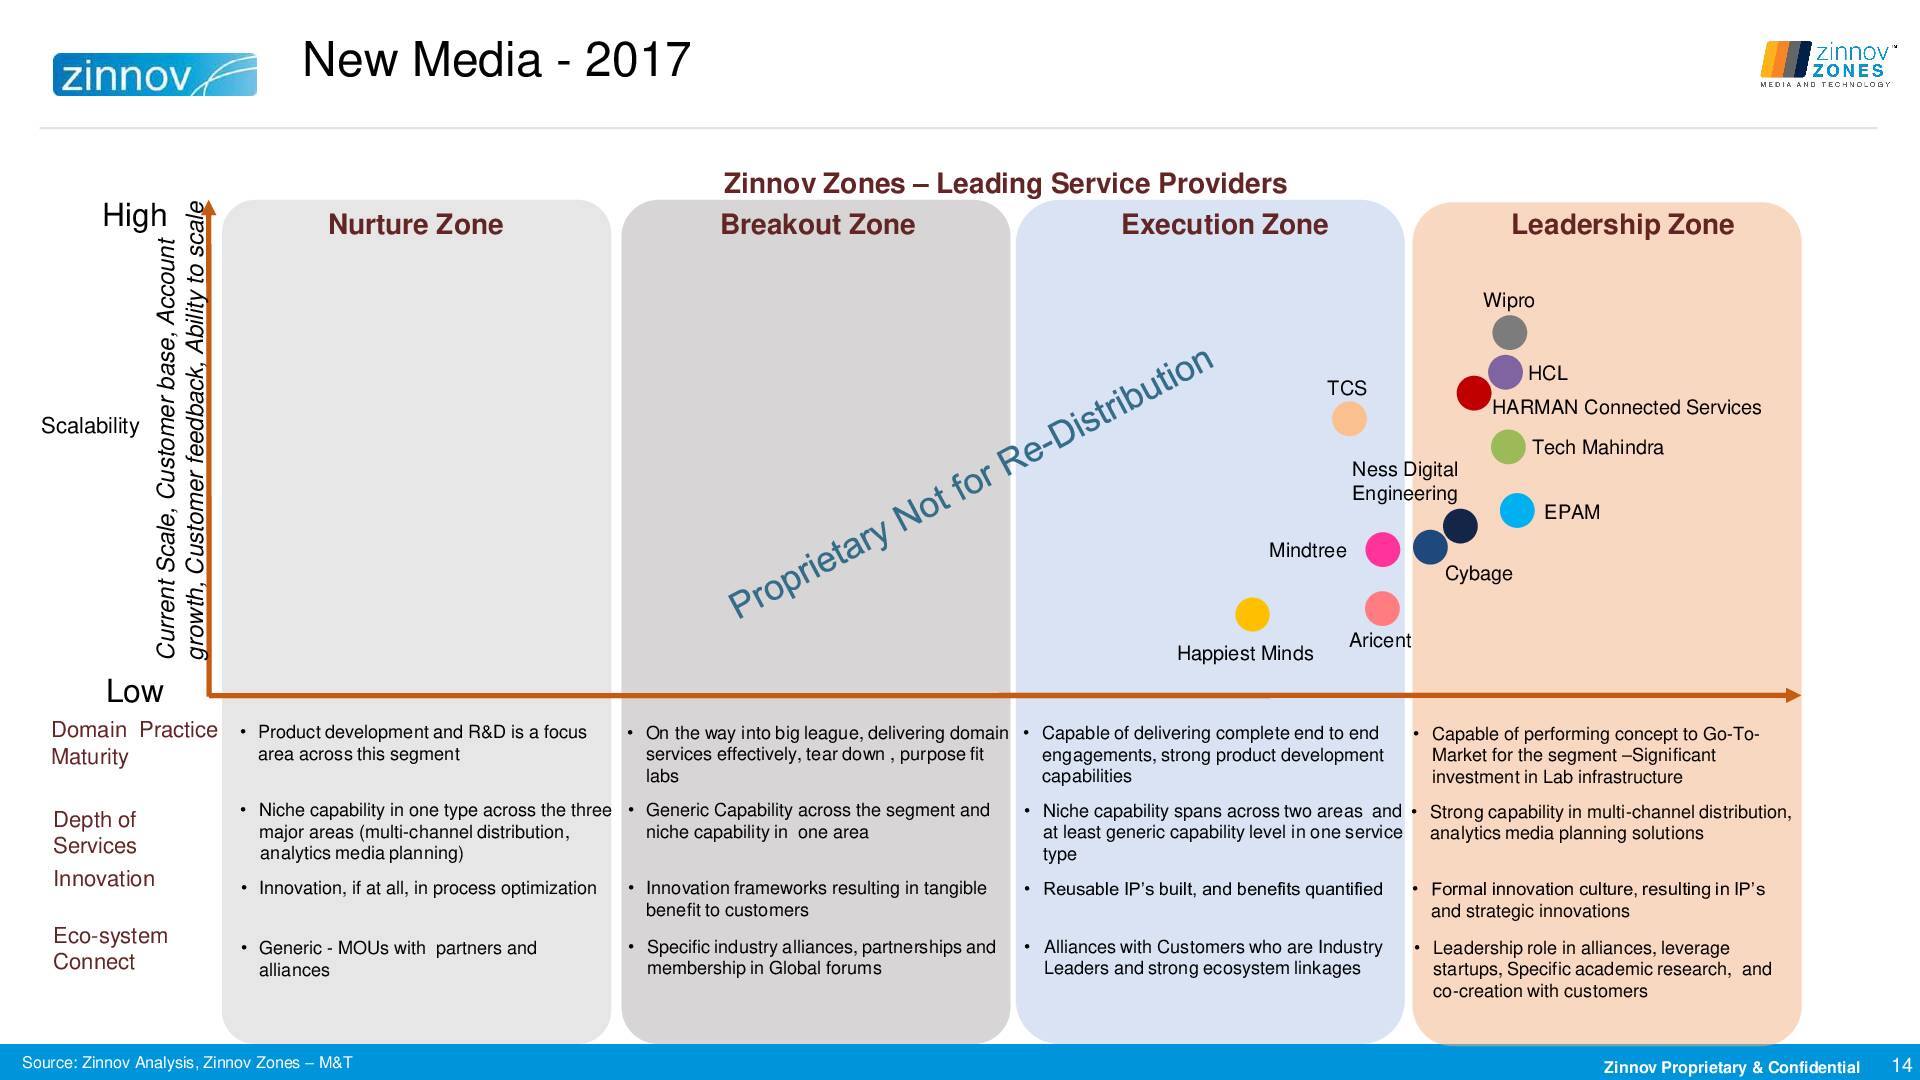 Media Technology Ratings 2017 Media Release  Zz Jun 18 2018 Compressed14